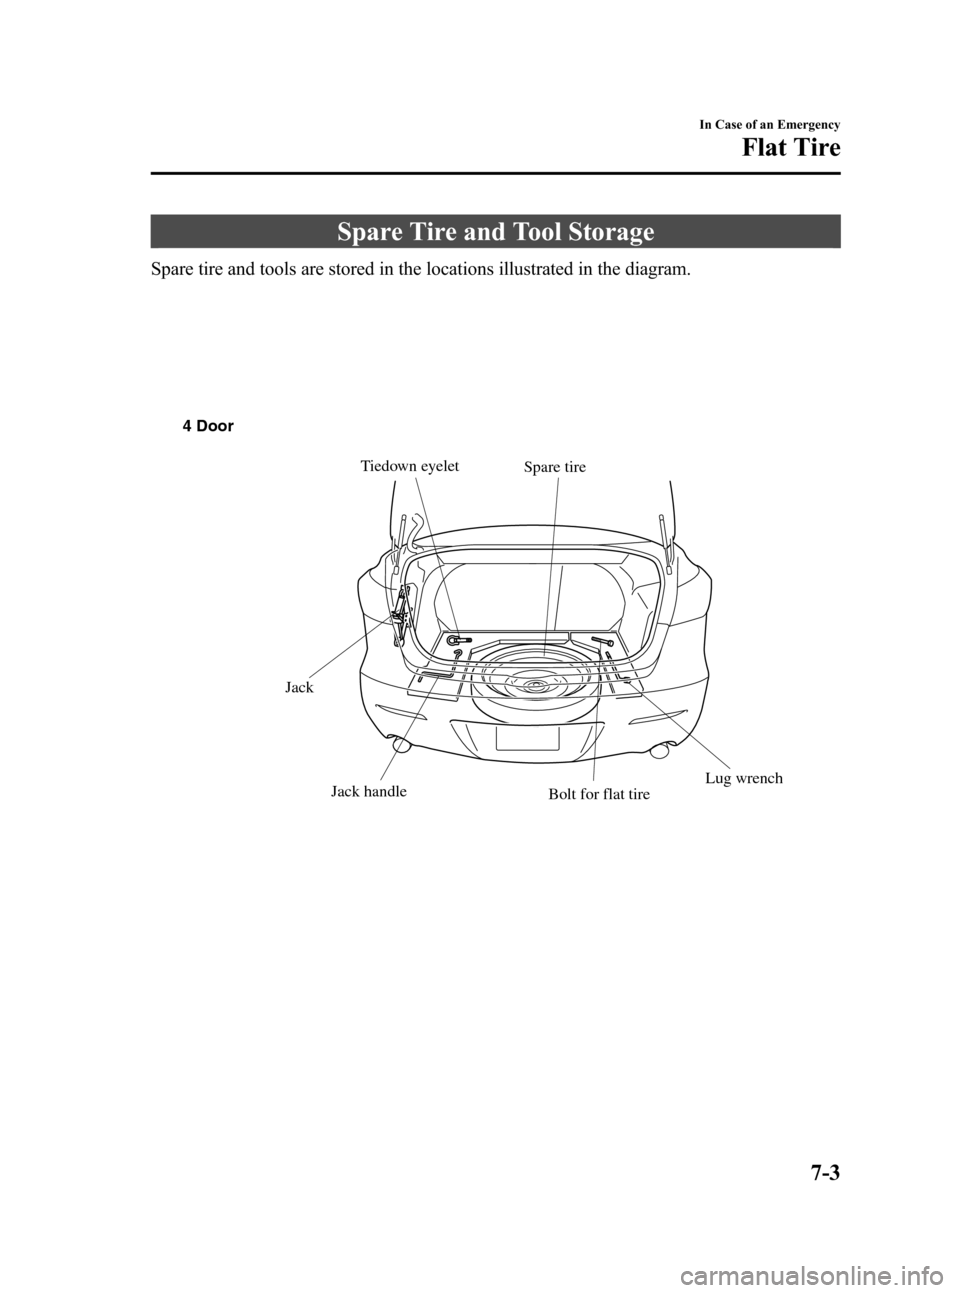 MAZDA MODEL 3 HATCHBACK 2010  Owners Manual (in English) Black plate (341,1)
Spare Tire and Tool Storage
Spare tire and tools are stored in the locations illustrated in the diagram.
Spare tire
Jack
Jack handleTiedown eyelet
Lug wrench
Bolt for flat tire 4 D